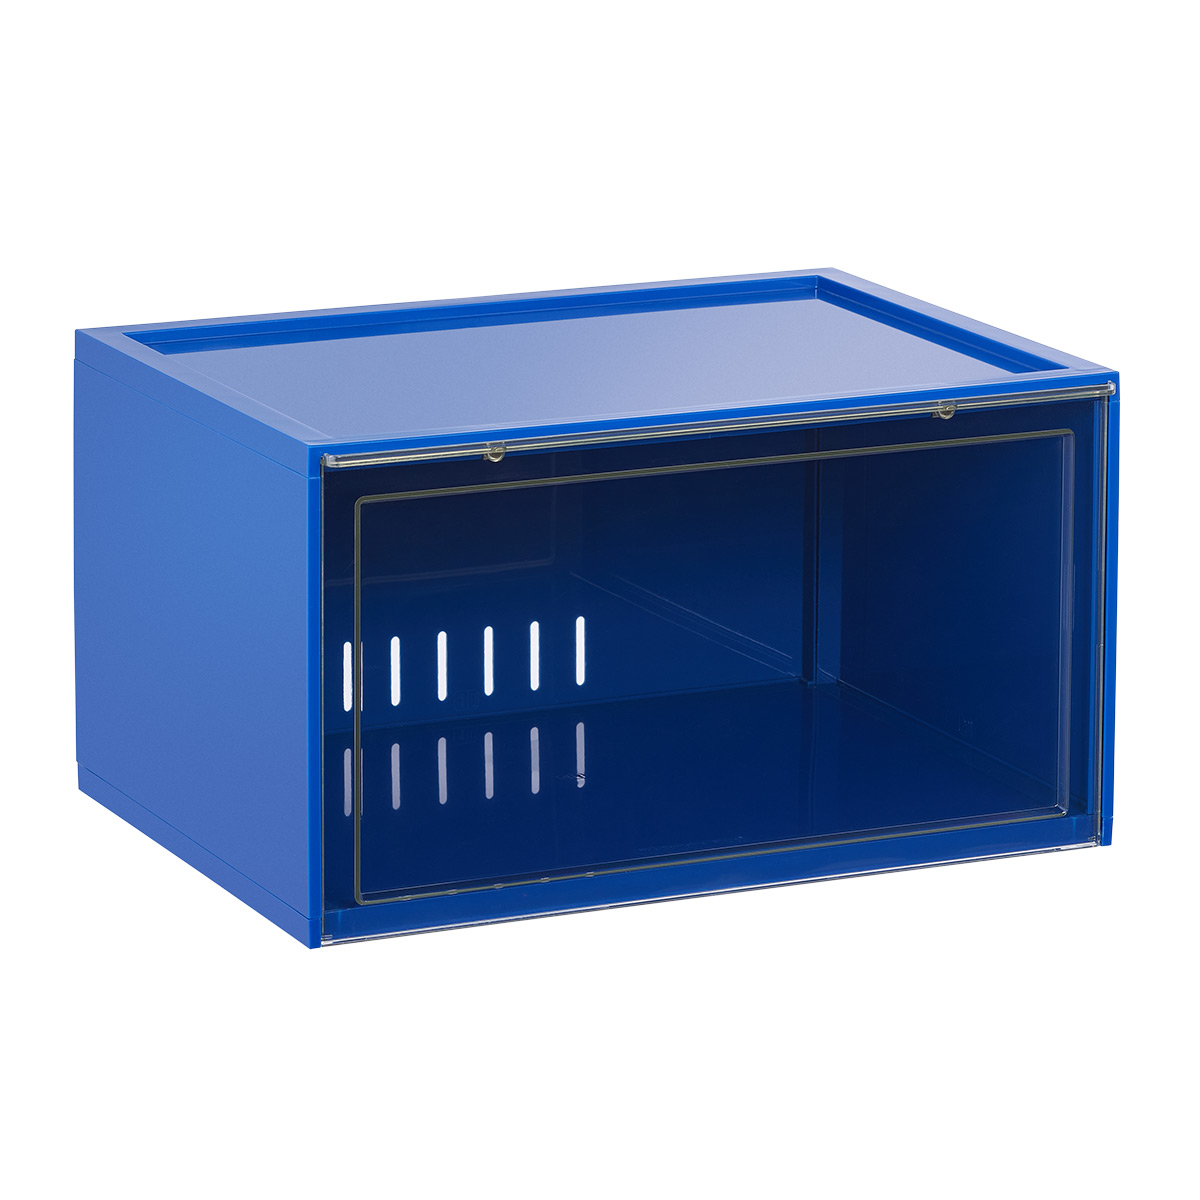 https://www.containerstore.com/catalogimages/435692/10086342_Extra_Large_Profile_Drop_Si.jpg